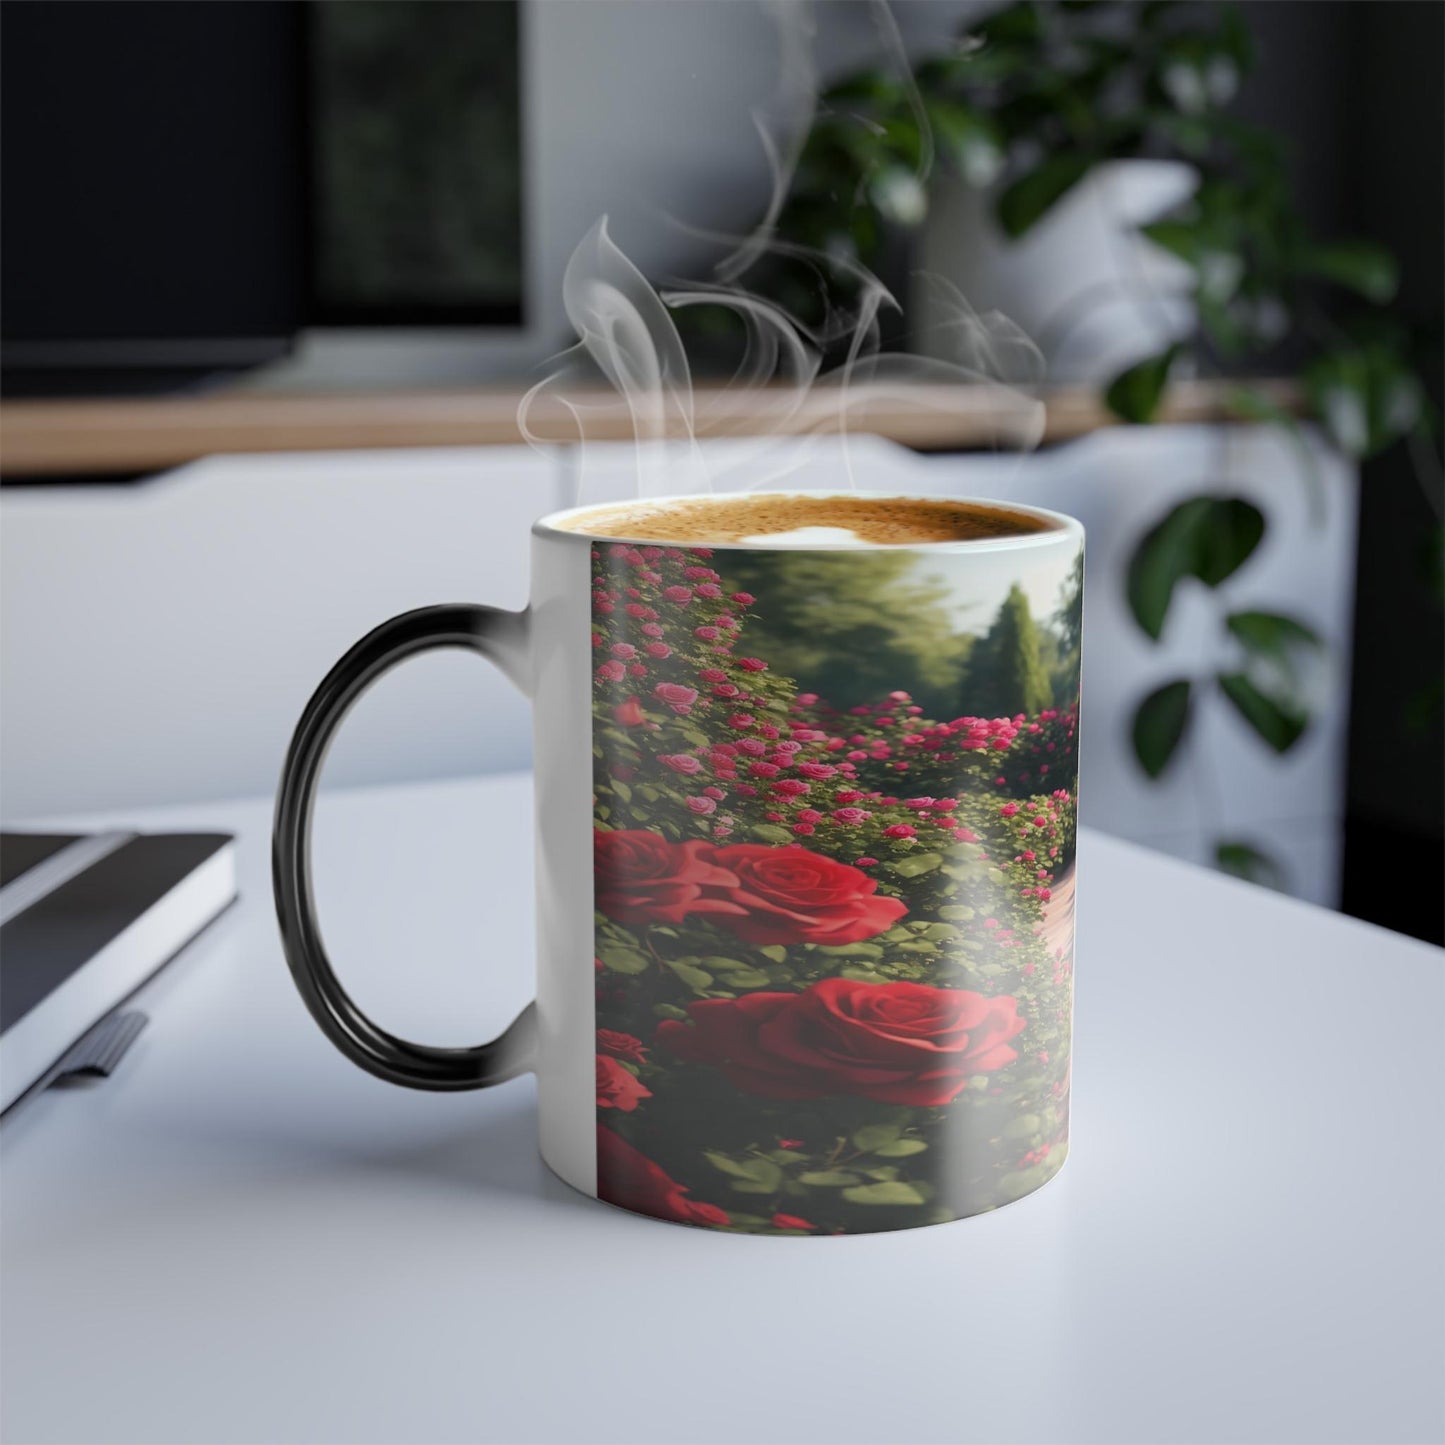 Enchanting Flower Magic Morphing Mug 11oz - Lovely Heat Sensitive Coffee Tea Cup with Flower, Rose, Tree, Heart Designs - Special Gifts for Flower Lovers 13